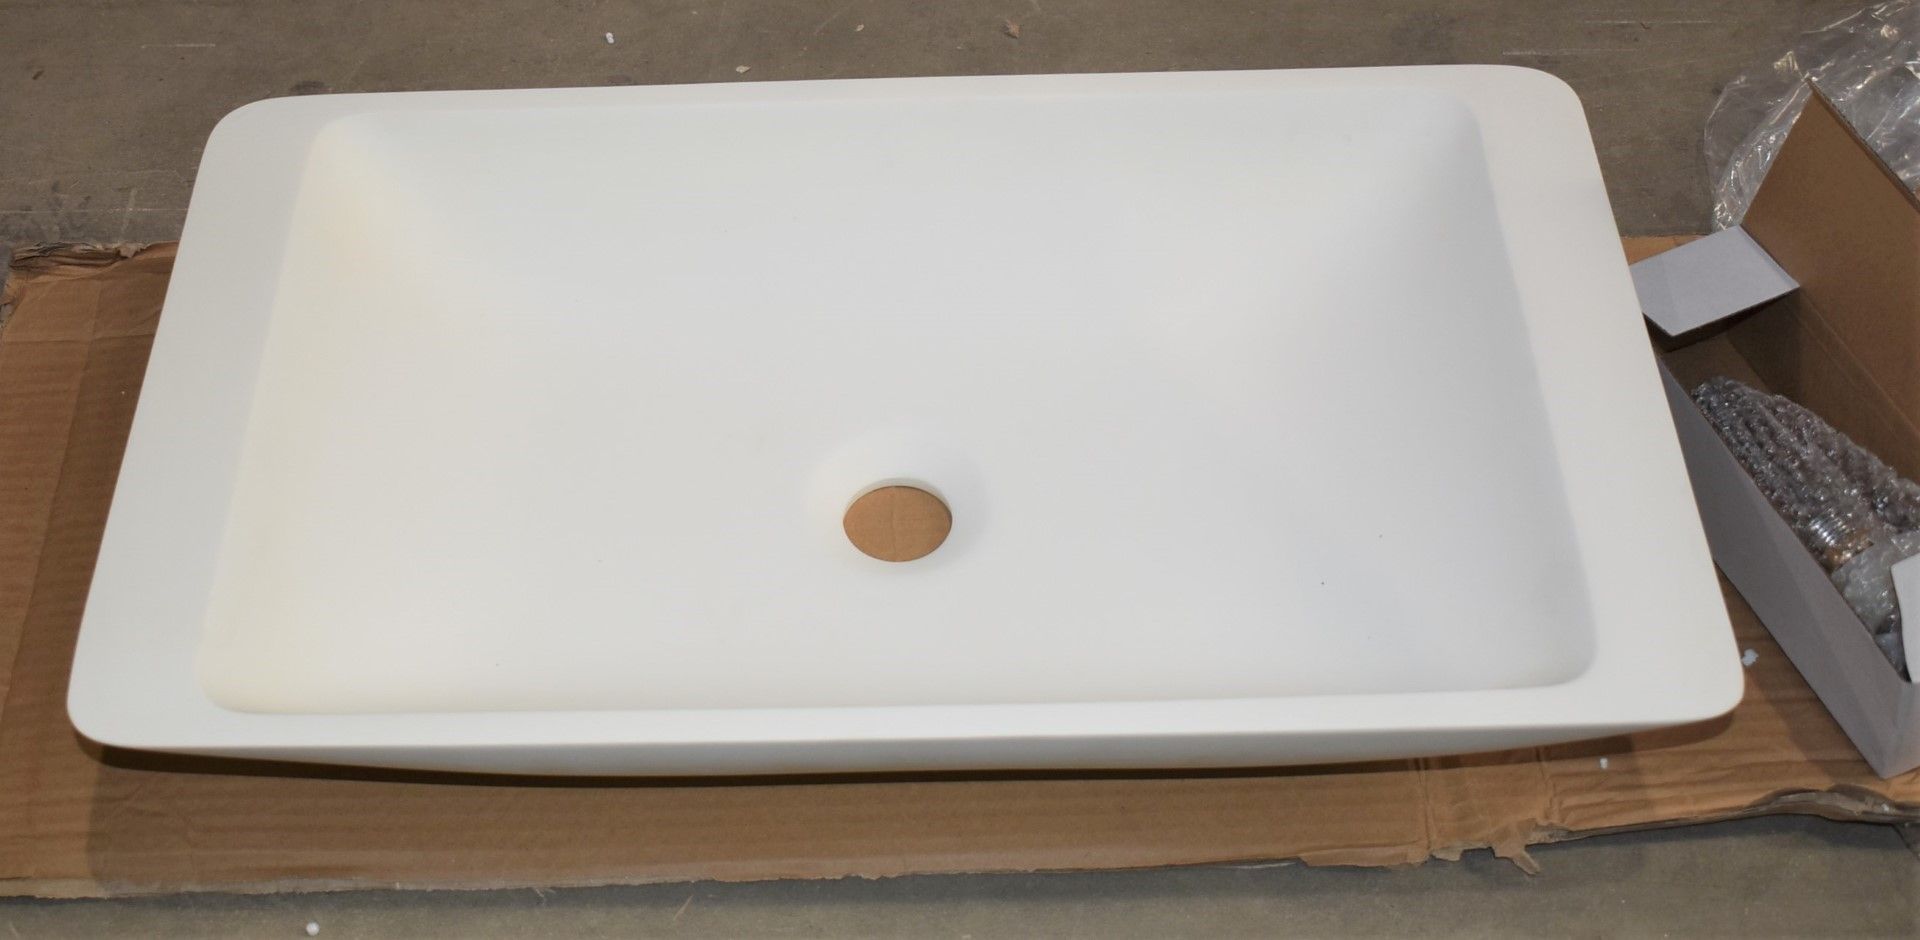 1 x Countertop Rectangular Wash Basin - Includes Slotted Pop Up Waste - New and Unused - H10 x W59 x - Image 3 of 5